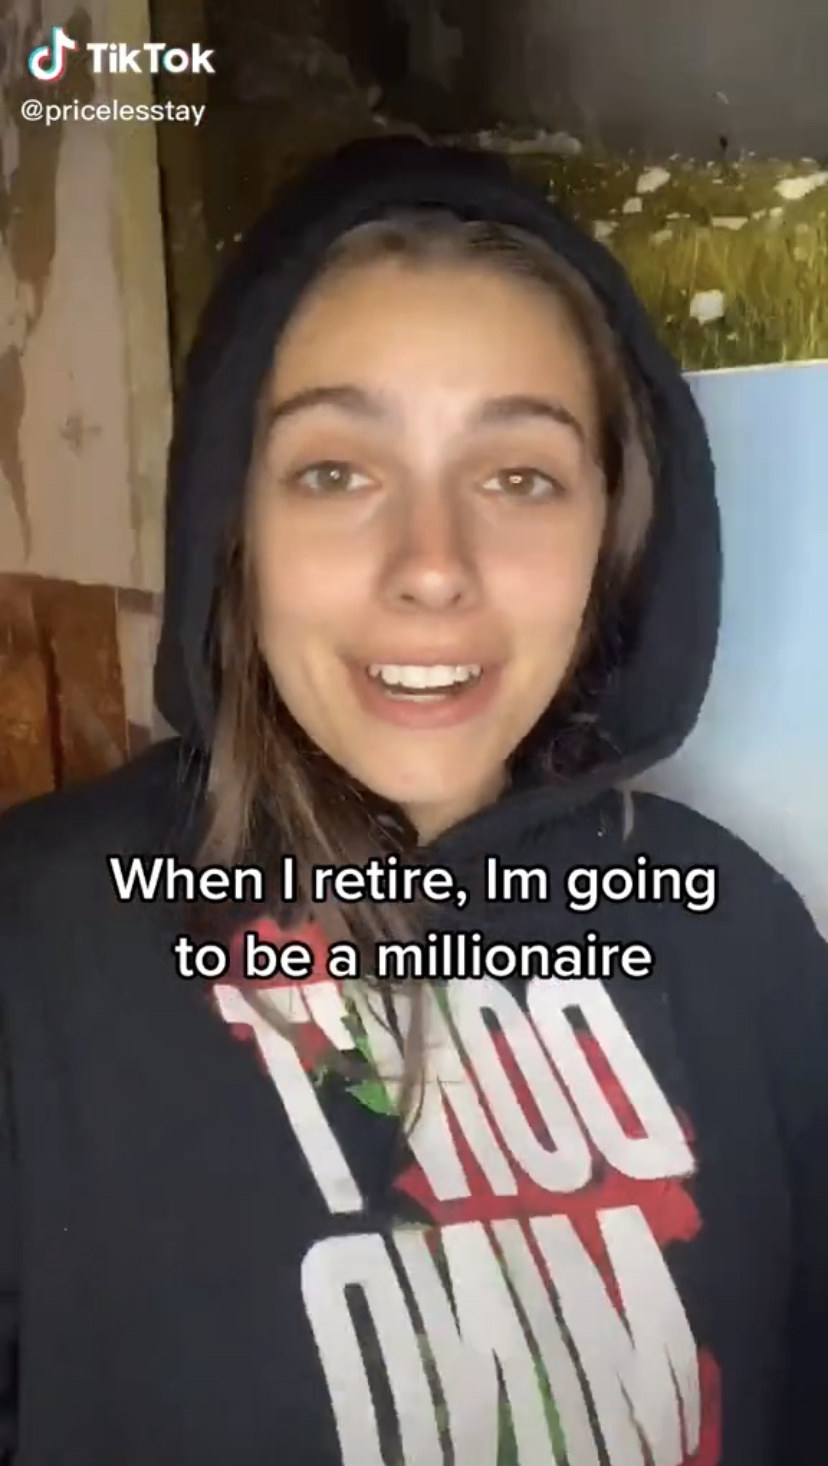 &quot;When I retire, I&#x27;m going to be a millionaire&quot;